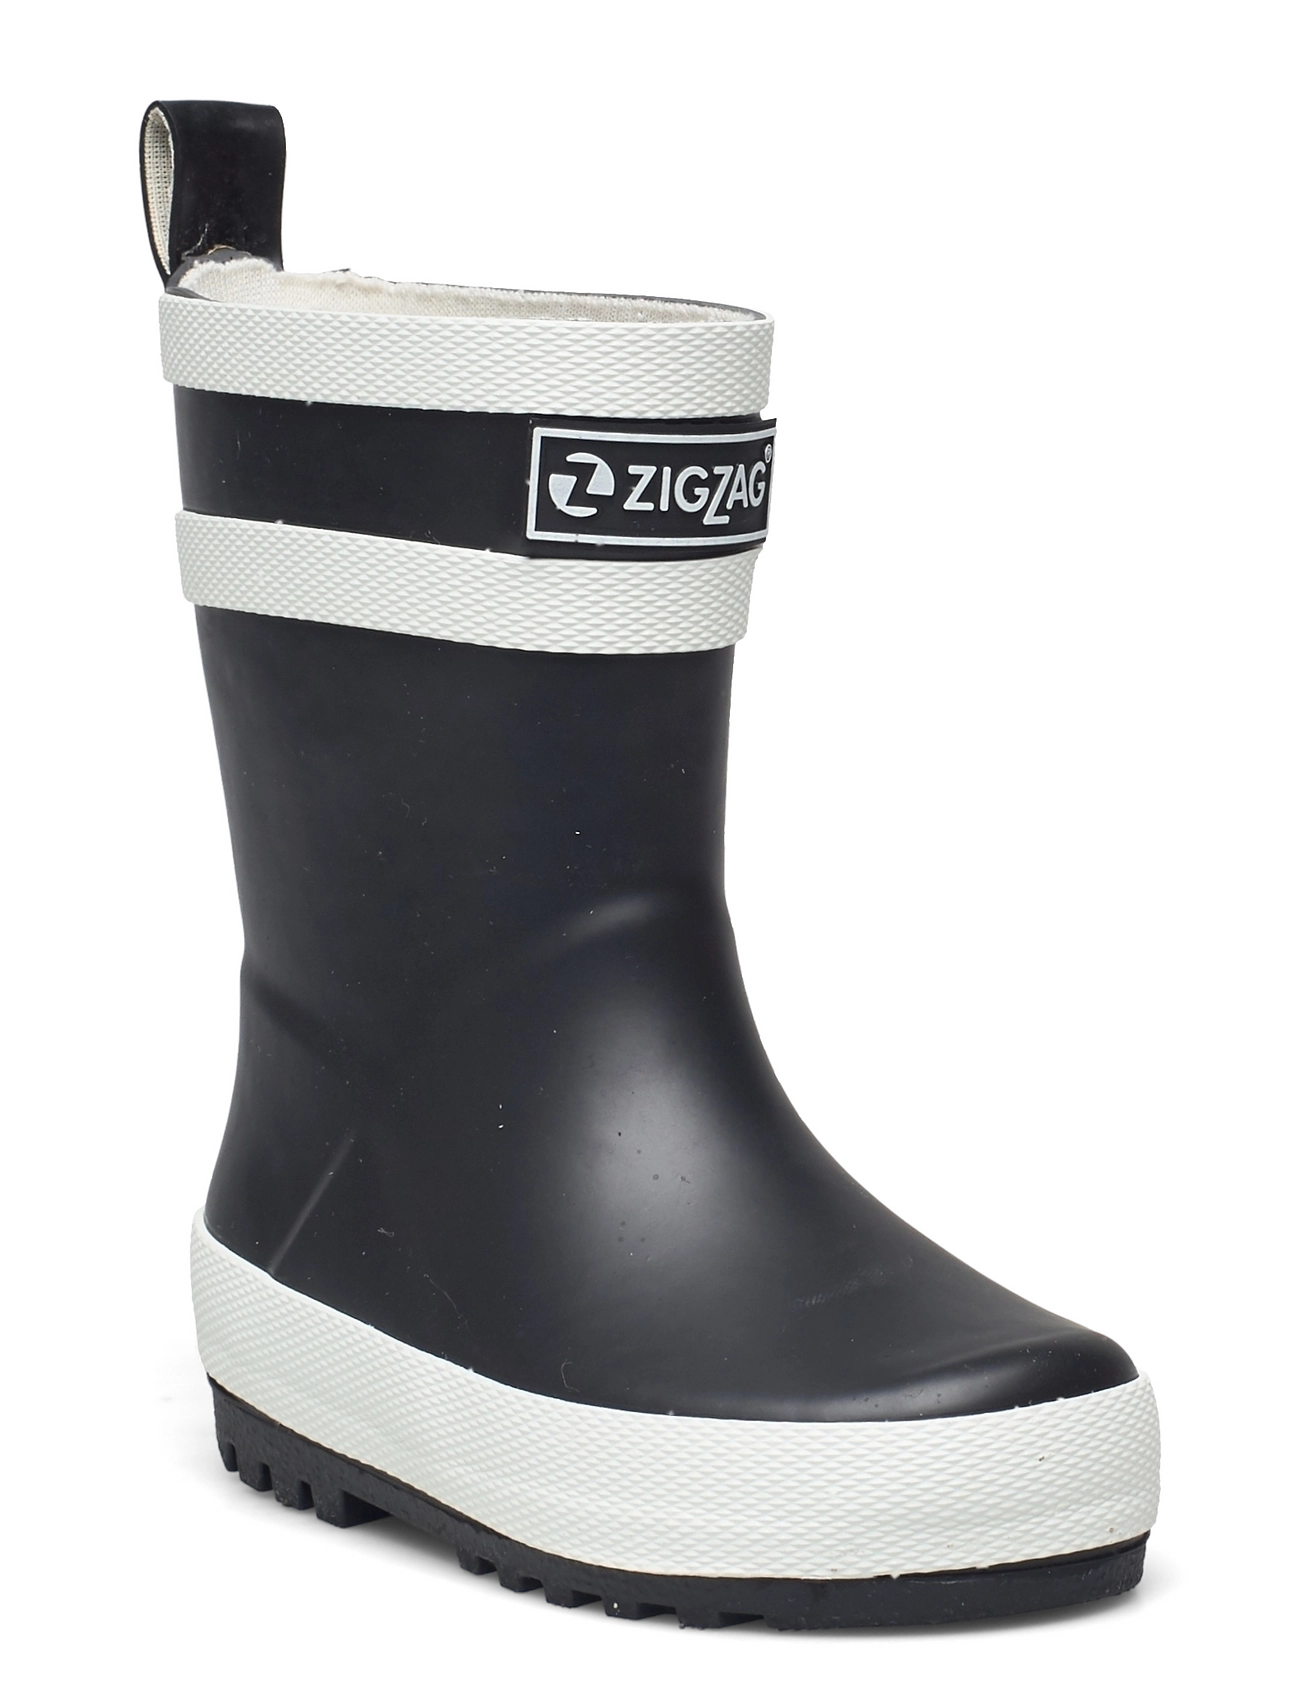 – Booztlet Boot rubberboots shop Rubber – Hurricane at Kids ZigZag